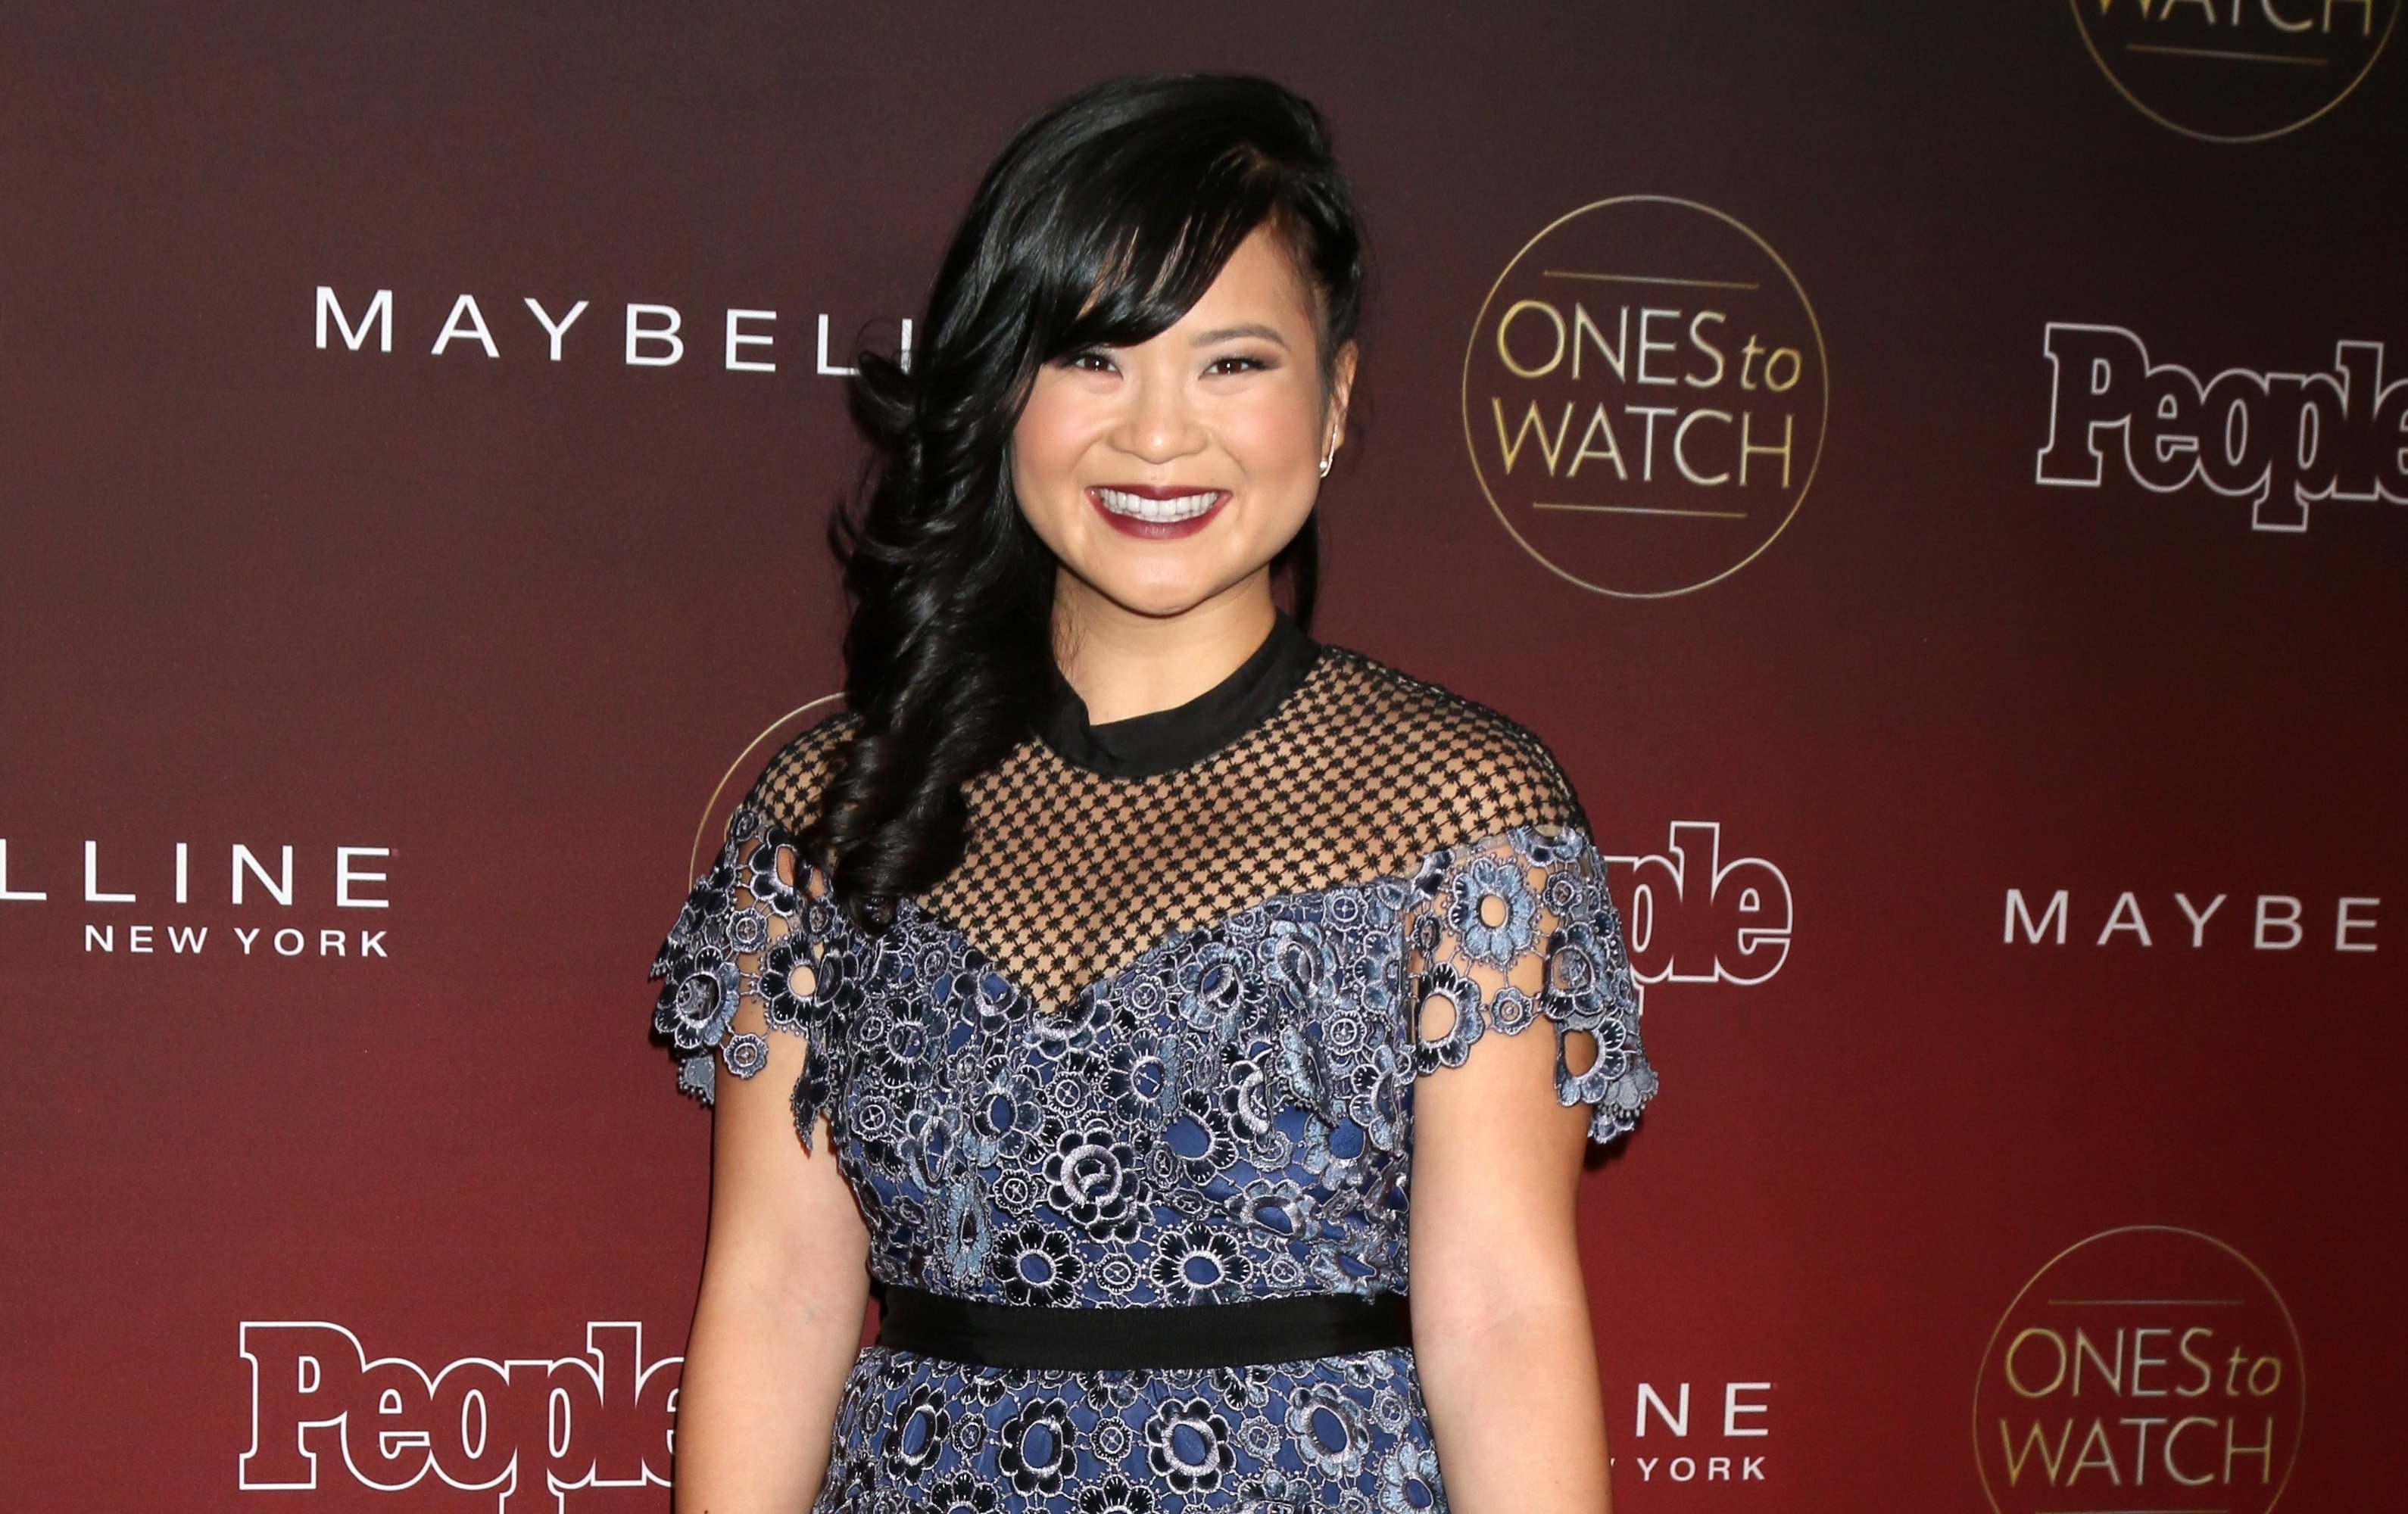 Shutterstock image of Kelly Marie Tran, who plays Rose Tico